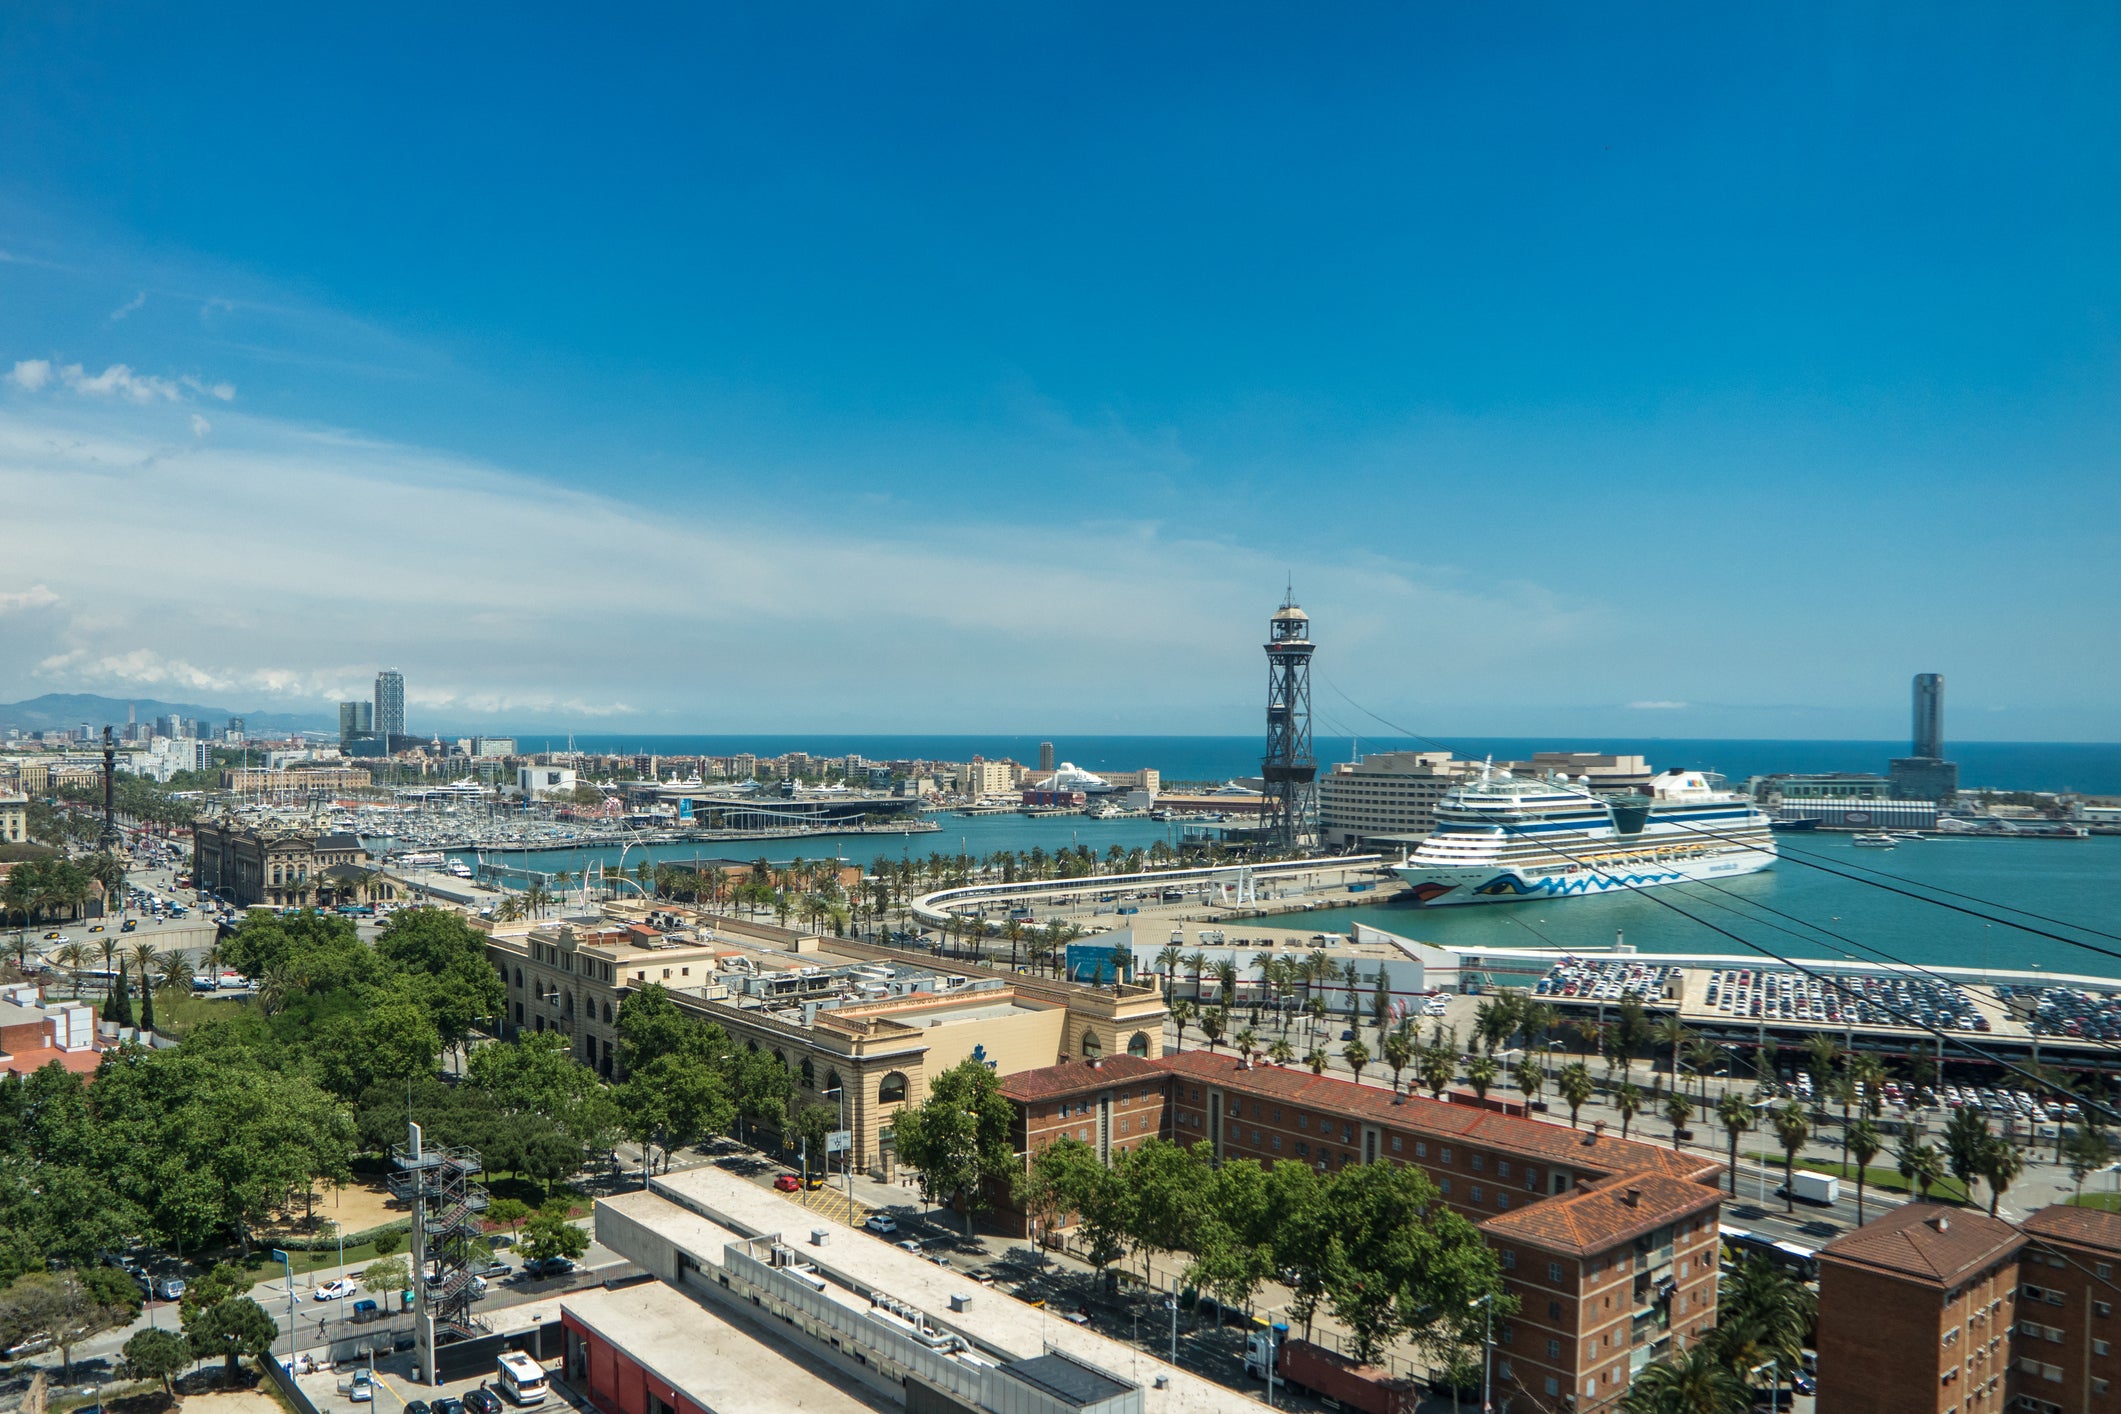 Barcelona finds itself as Europe’s most polluted port, according to new research